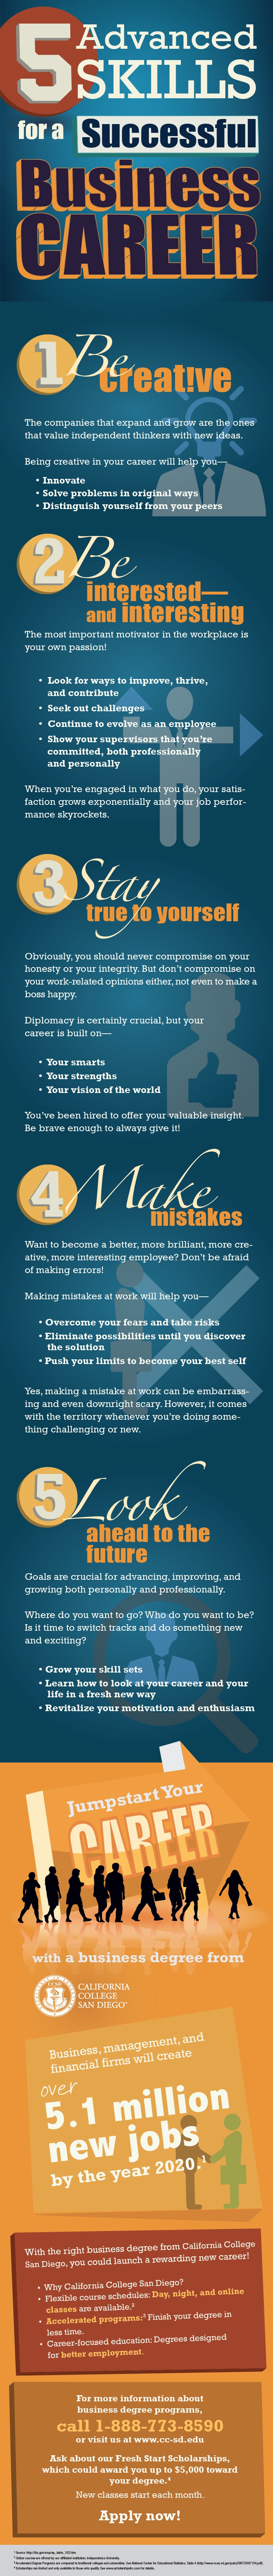 5 Skills to Advance your Career Infographic